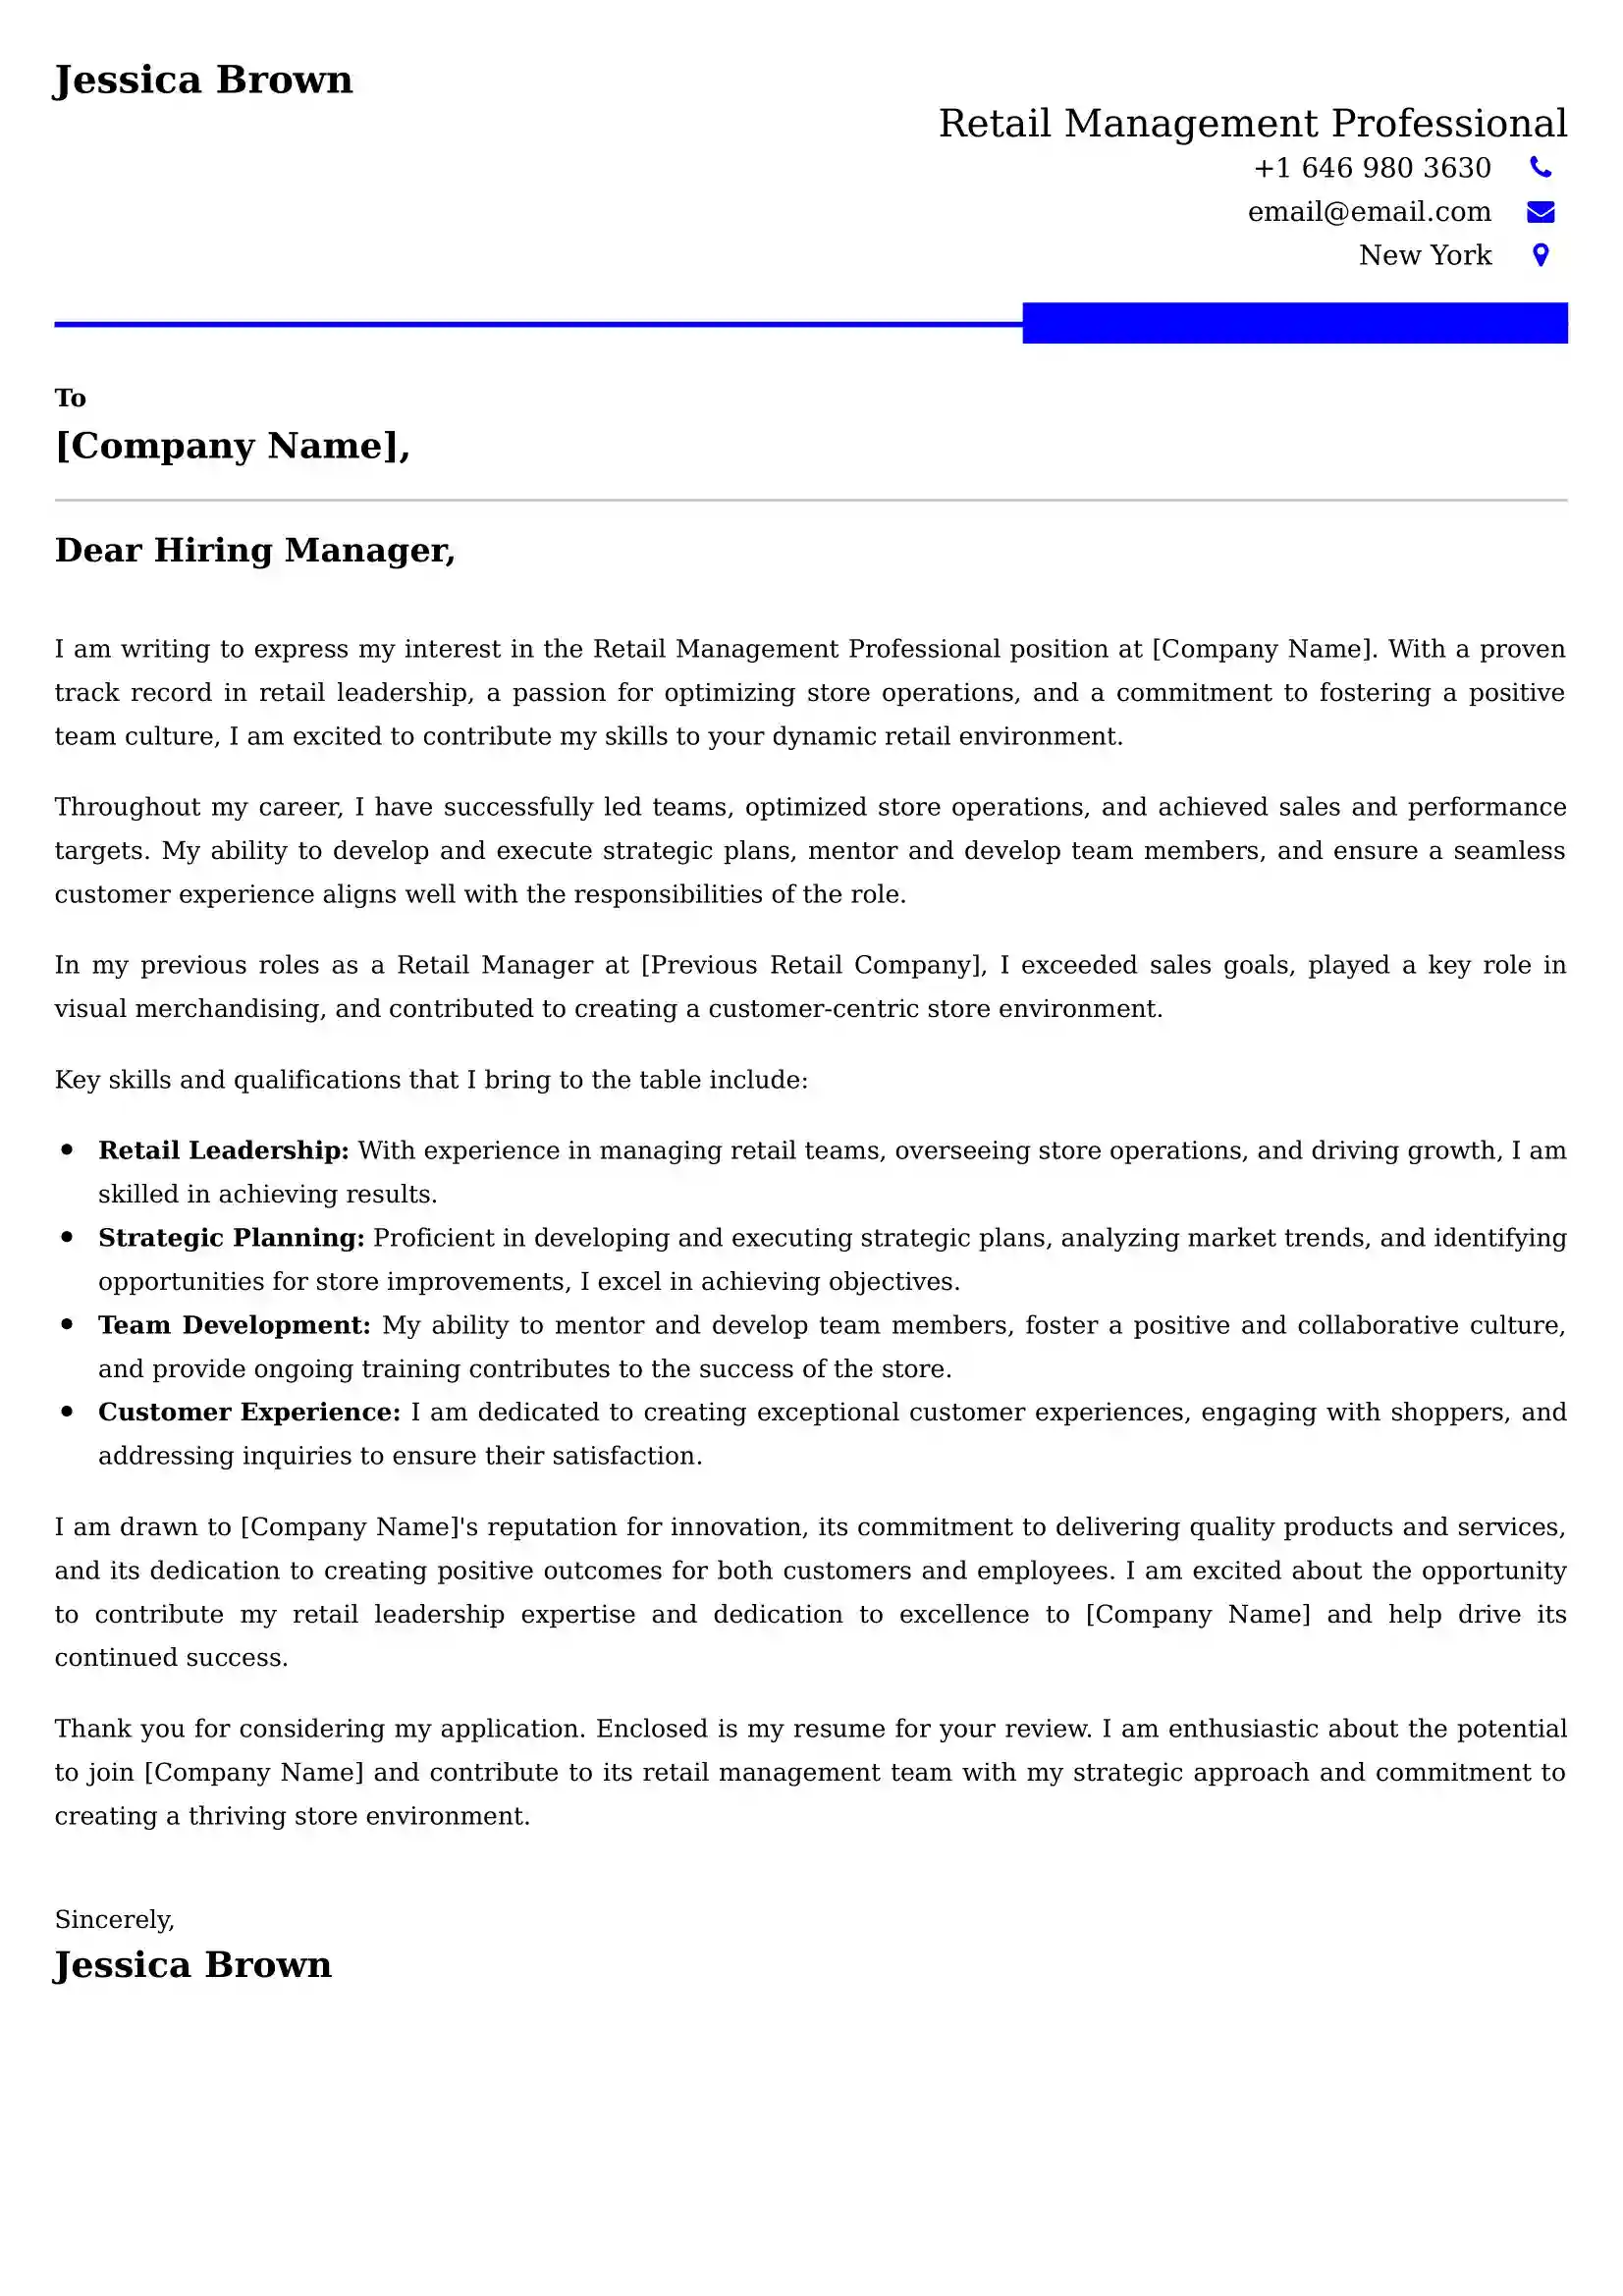 Retail Management Professional Cover Letter Sample